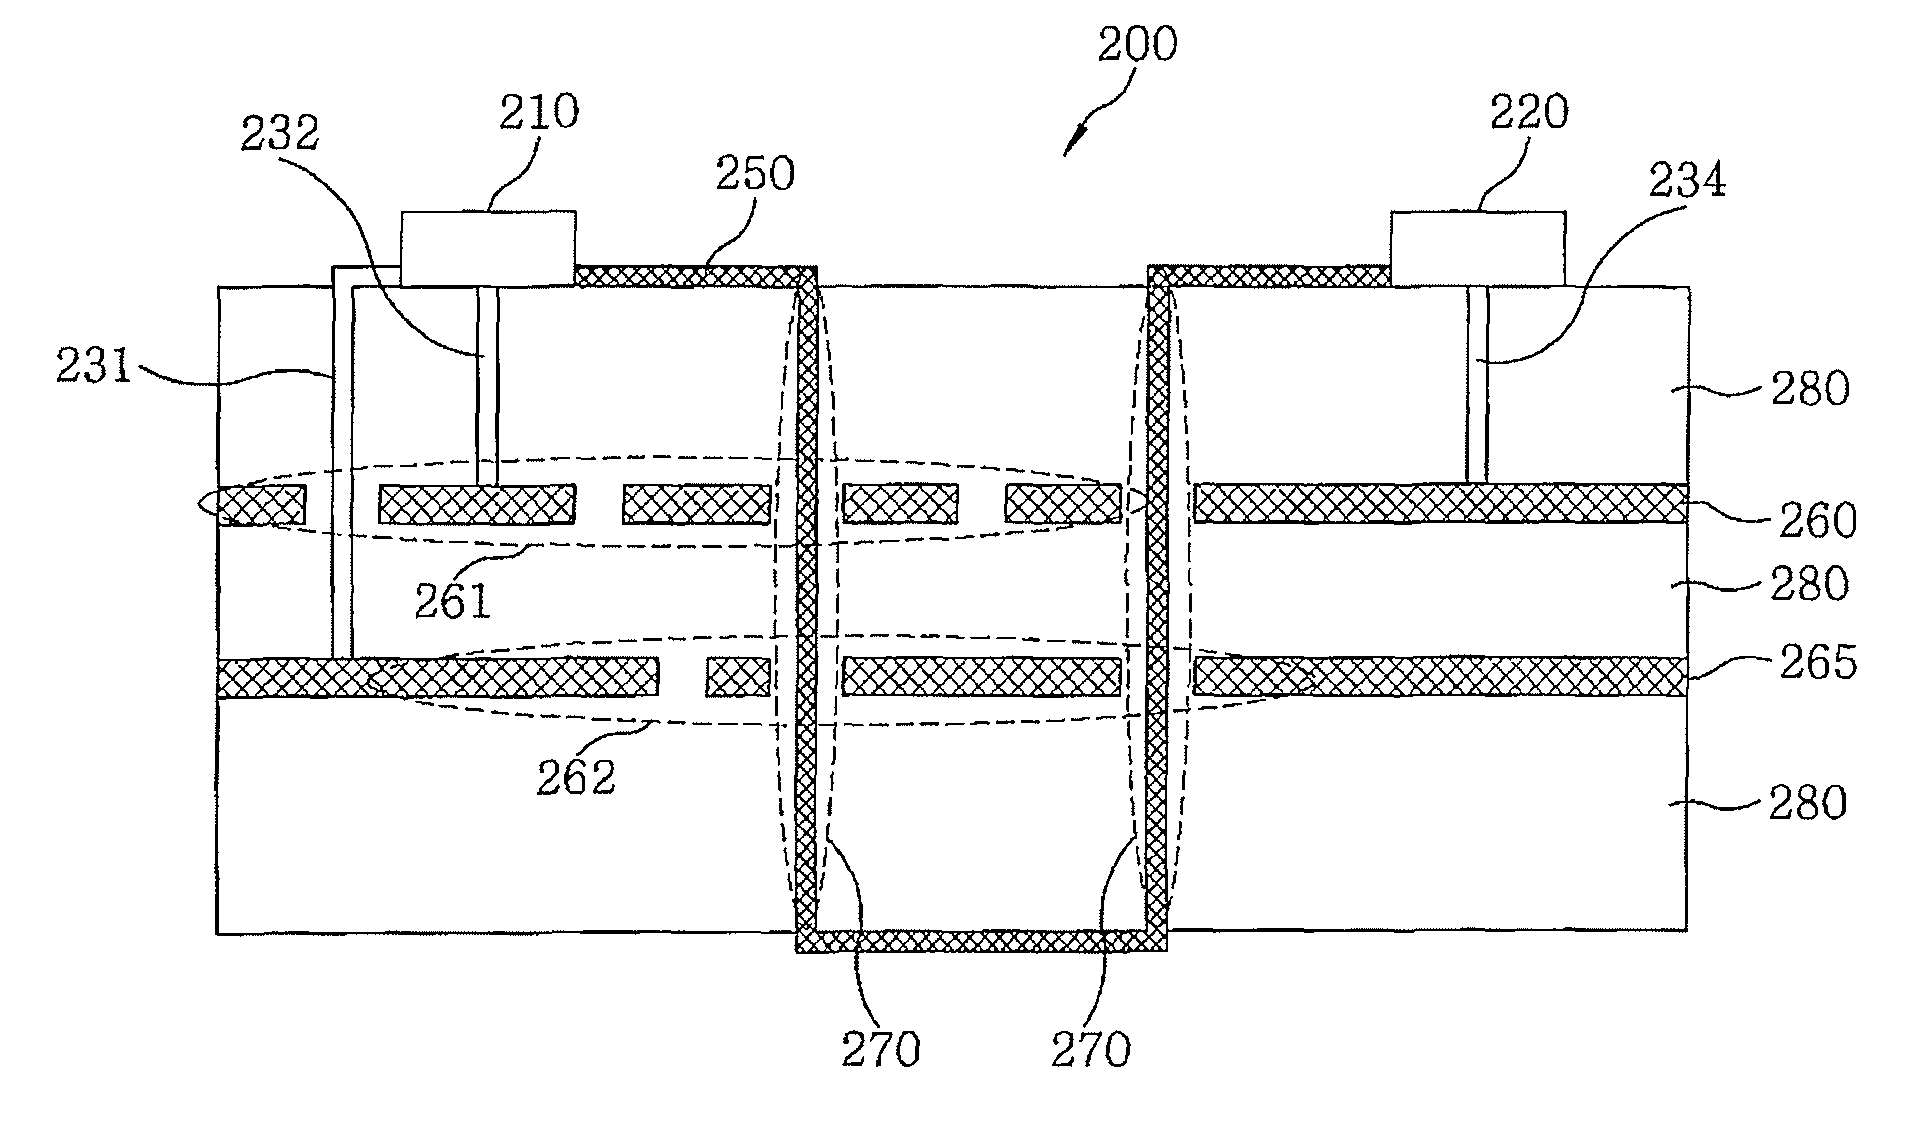 Arrangement structure of electromagnetic band-gap for suppressing noise and improving signal integrity